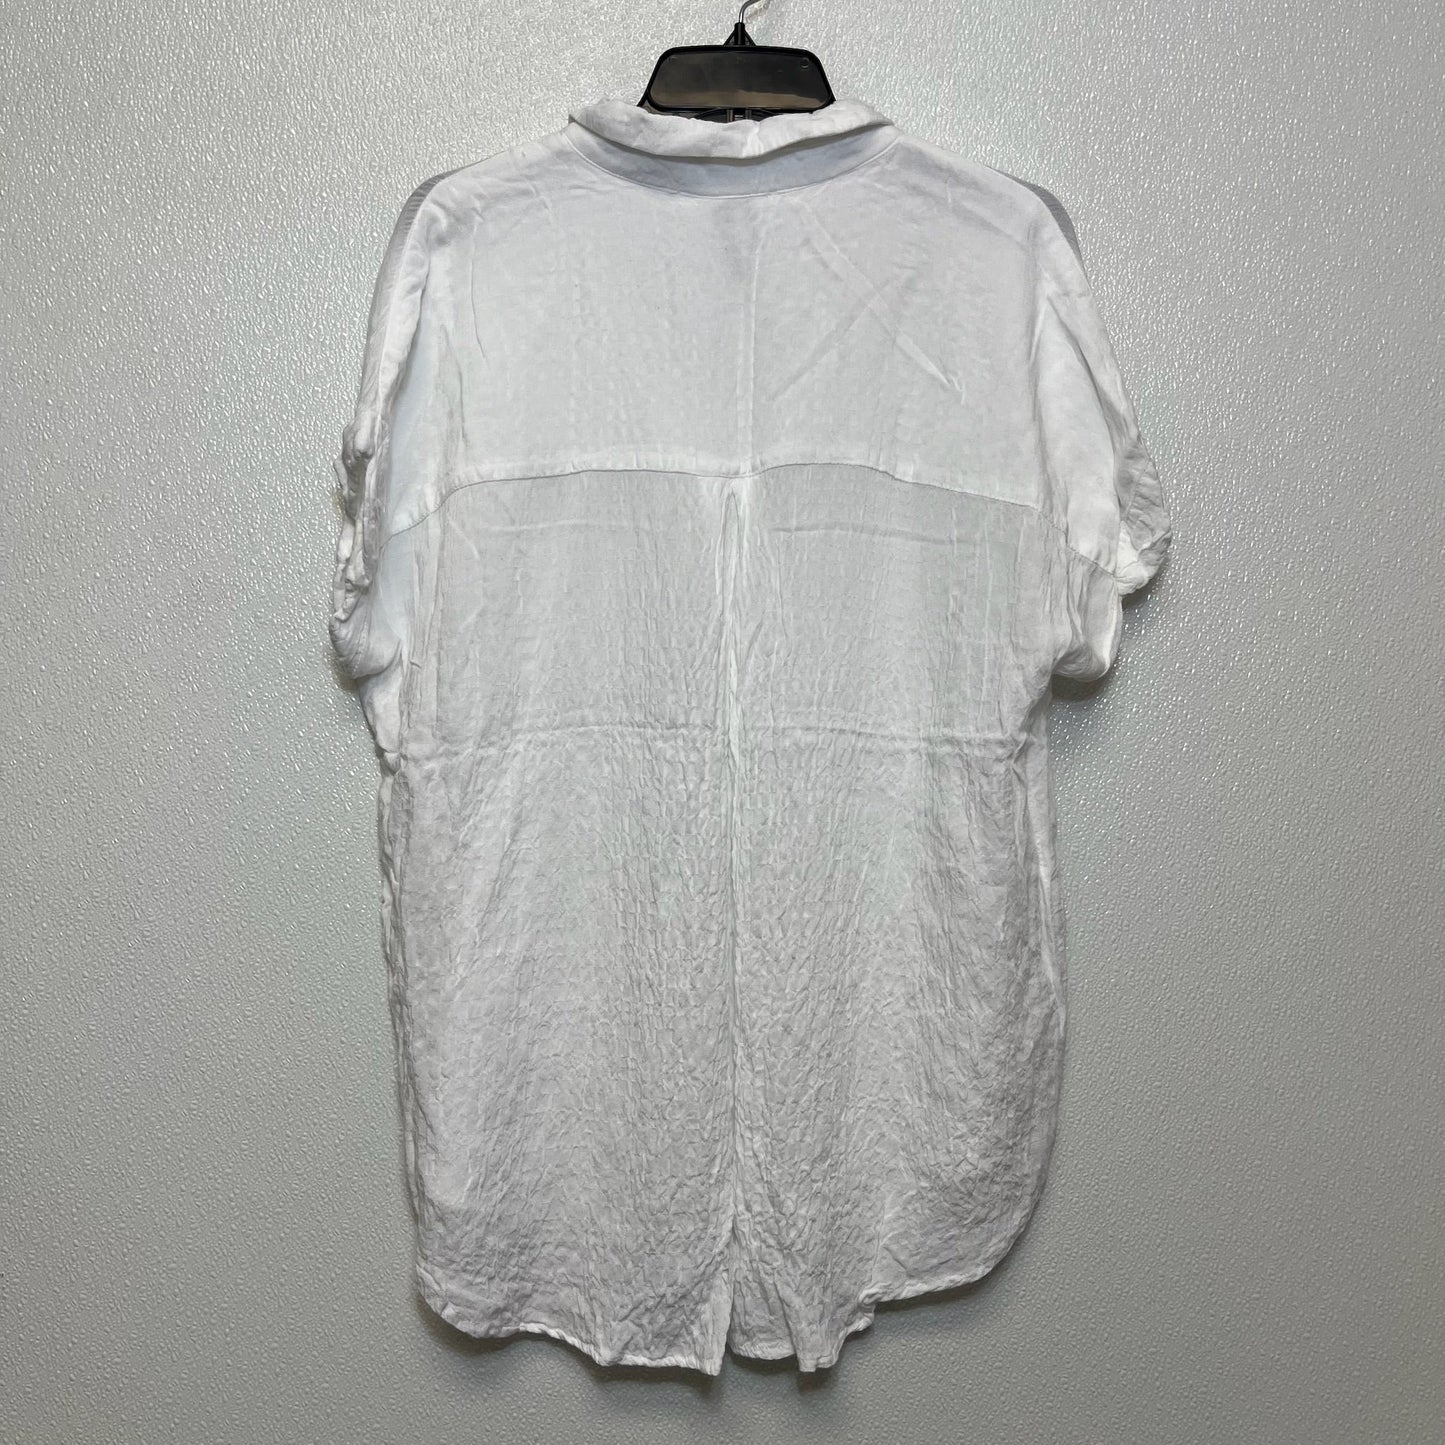 White Top Short Sleeve Jane And Delancey, Size L